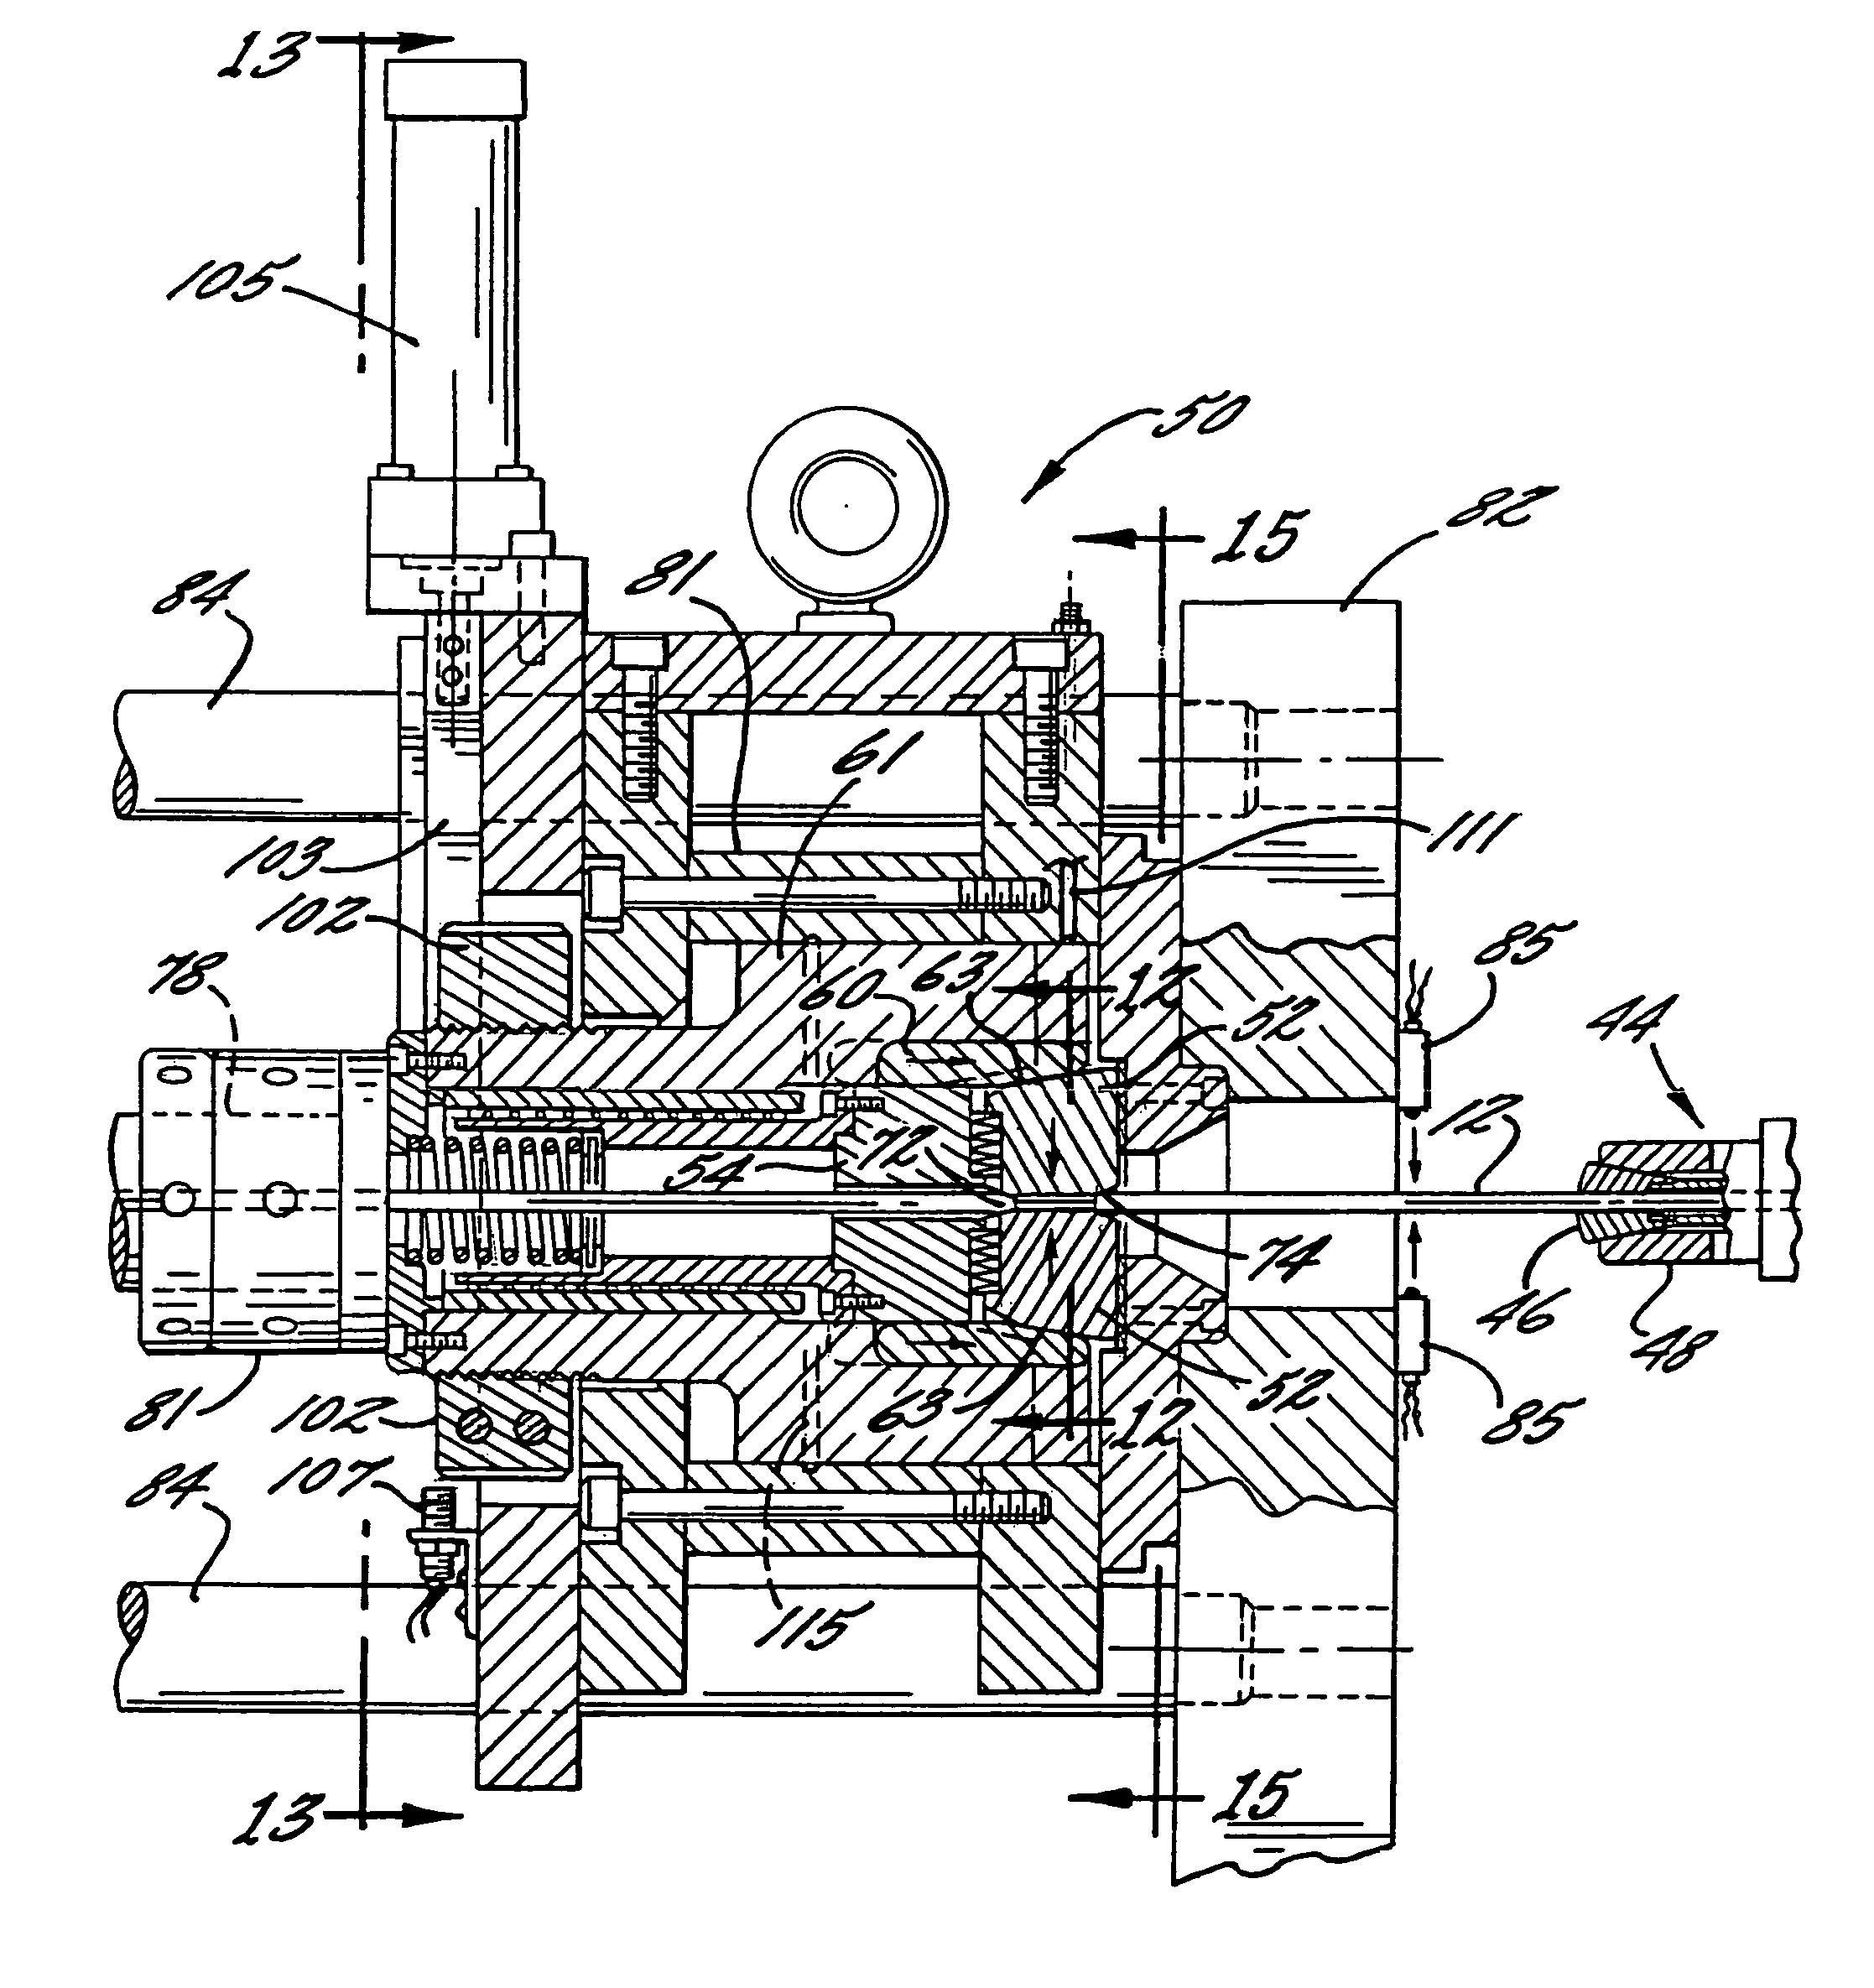 Method and apparatus for forming parts from a continuous stock material and associated forge